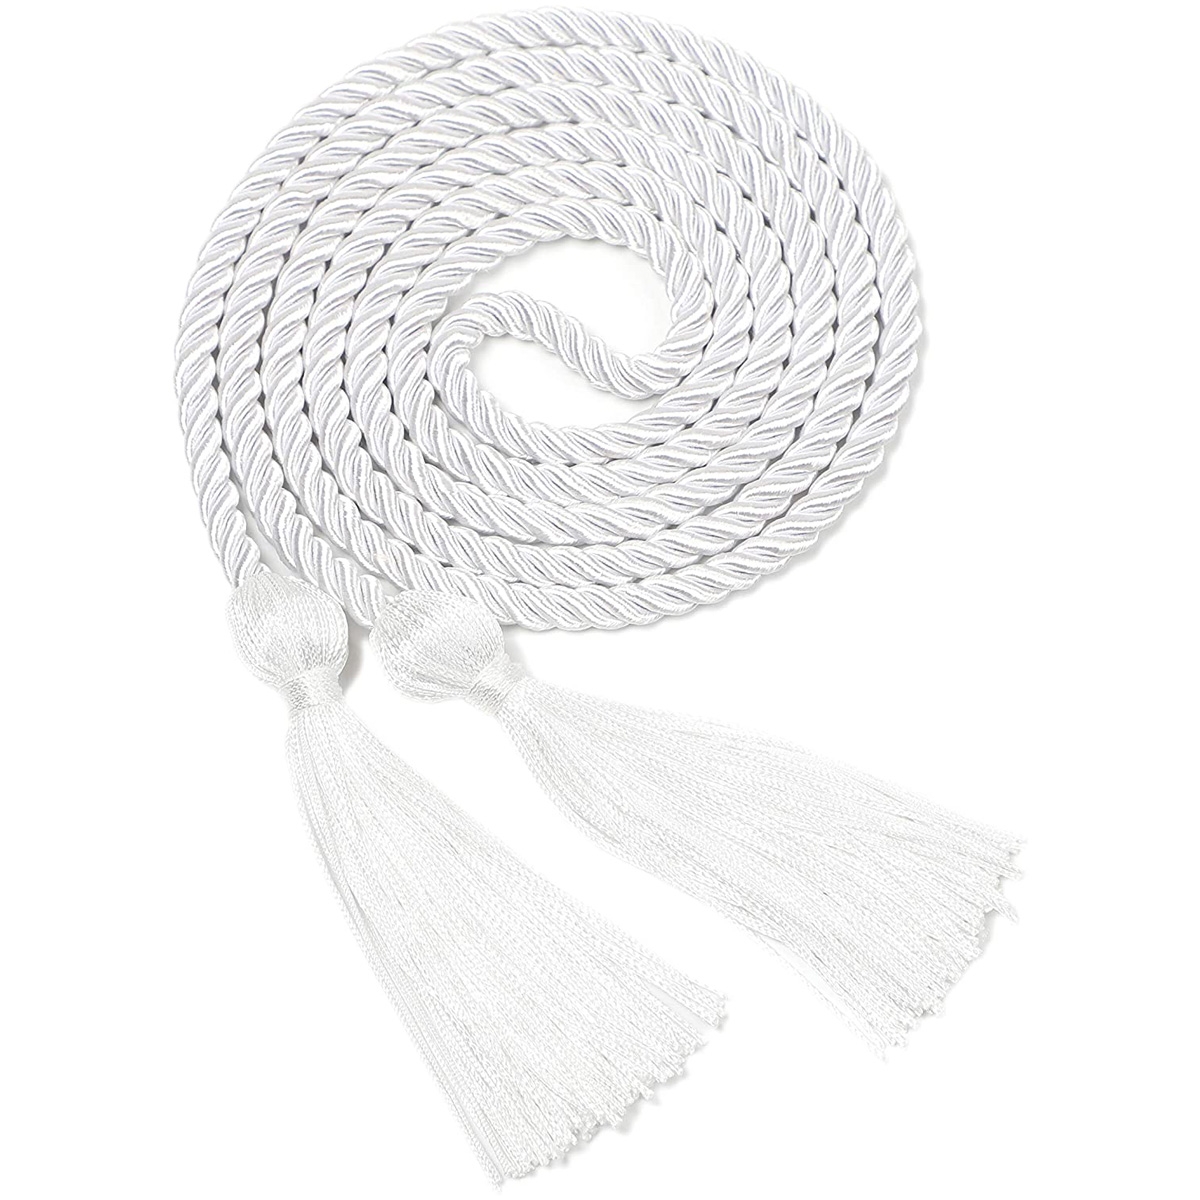 Cords Tassels Cords Polyester Yarn Honor Cord for Graduation Students 63 Inchs Long (White)